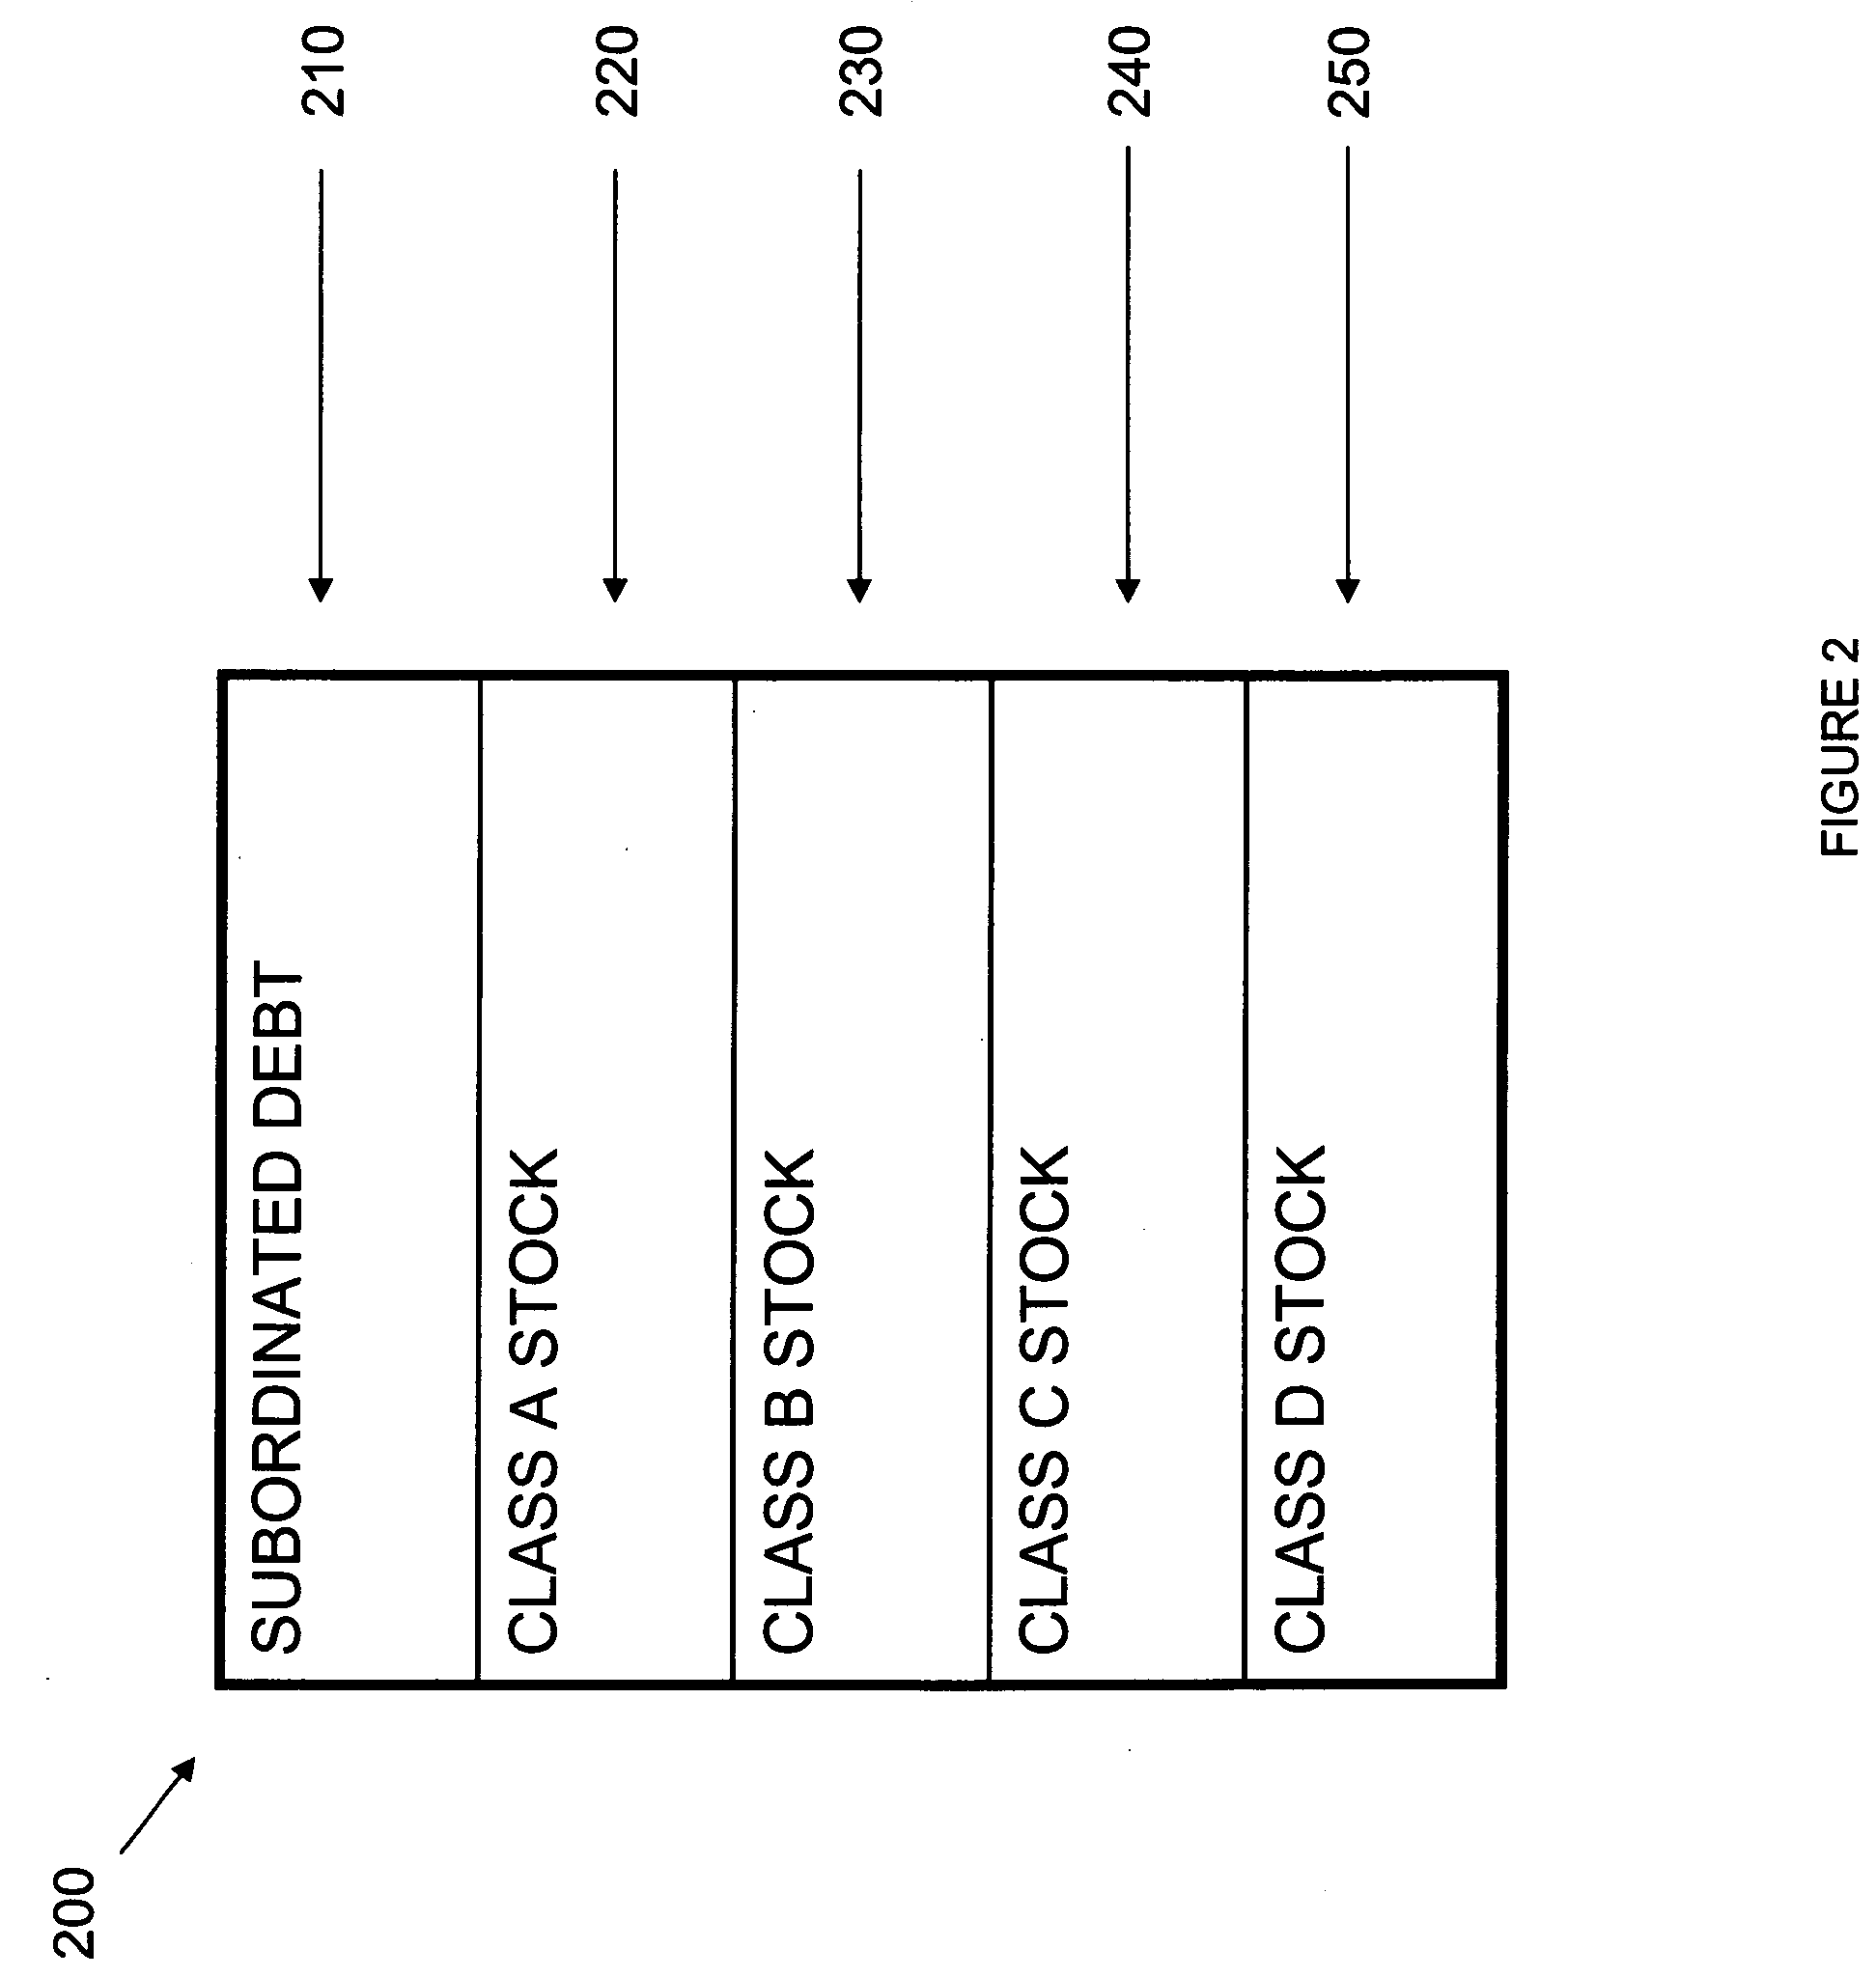 Method of capitalizing a bank or bank holding company